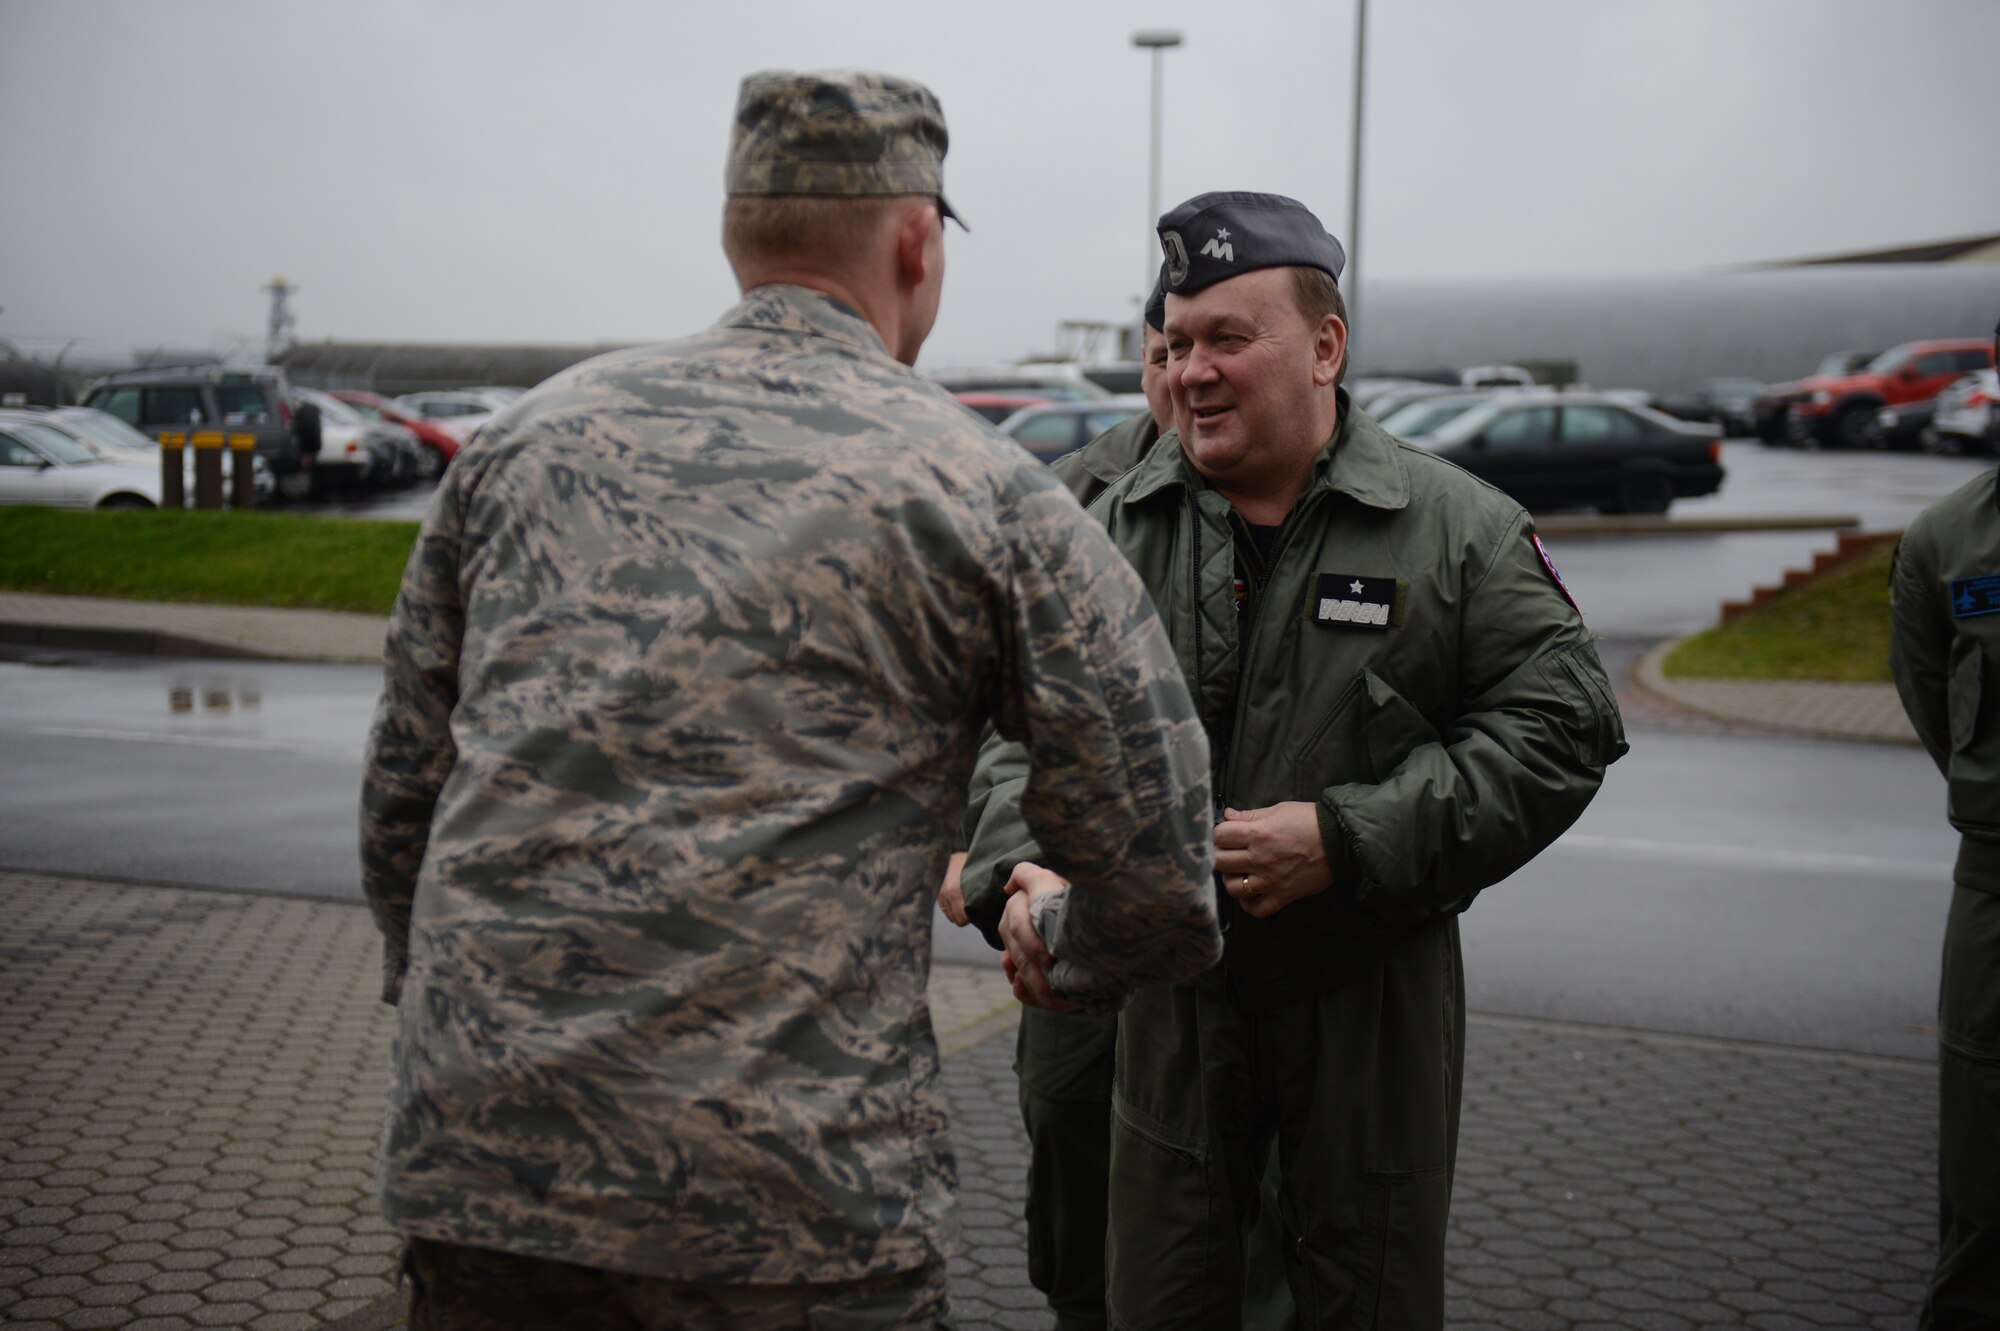 SPANGDAHLEM AIR BASE, Germany – U.S. Air Force Col. Joseph McFall, 52nd Fighter Wing vice commander from Maple Valley, Wash., shakes the hand of Polish air force Brig. Gen. Wlodzimierz Usarek, 2nd Tactical Air Wing commander, near the 480th Fighter Squadron during a visit to Spangdahlem Air Base Nov. 26, 2012.  Usarek, Polish air force leadership and the 52nd Fighter Wing wish to learn from each other and share ideas to better both countries’ flight operations. (U.S. Air Force photo by Airman 1st Class Gustavo Castillo/Released)